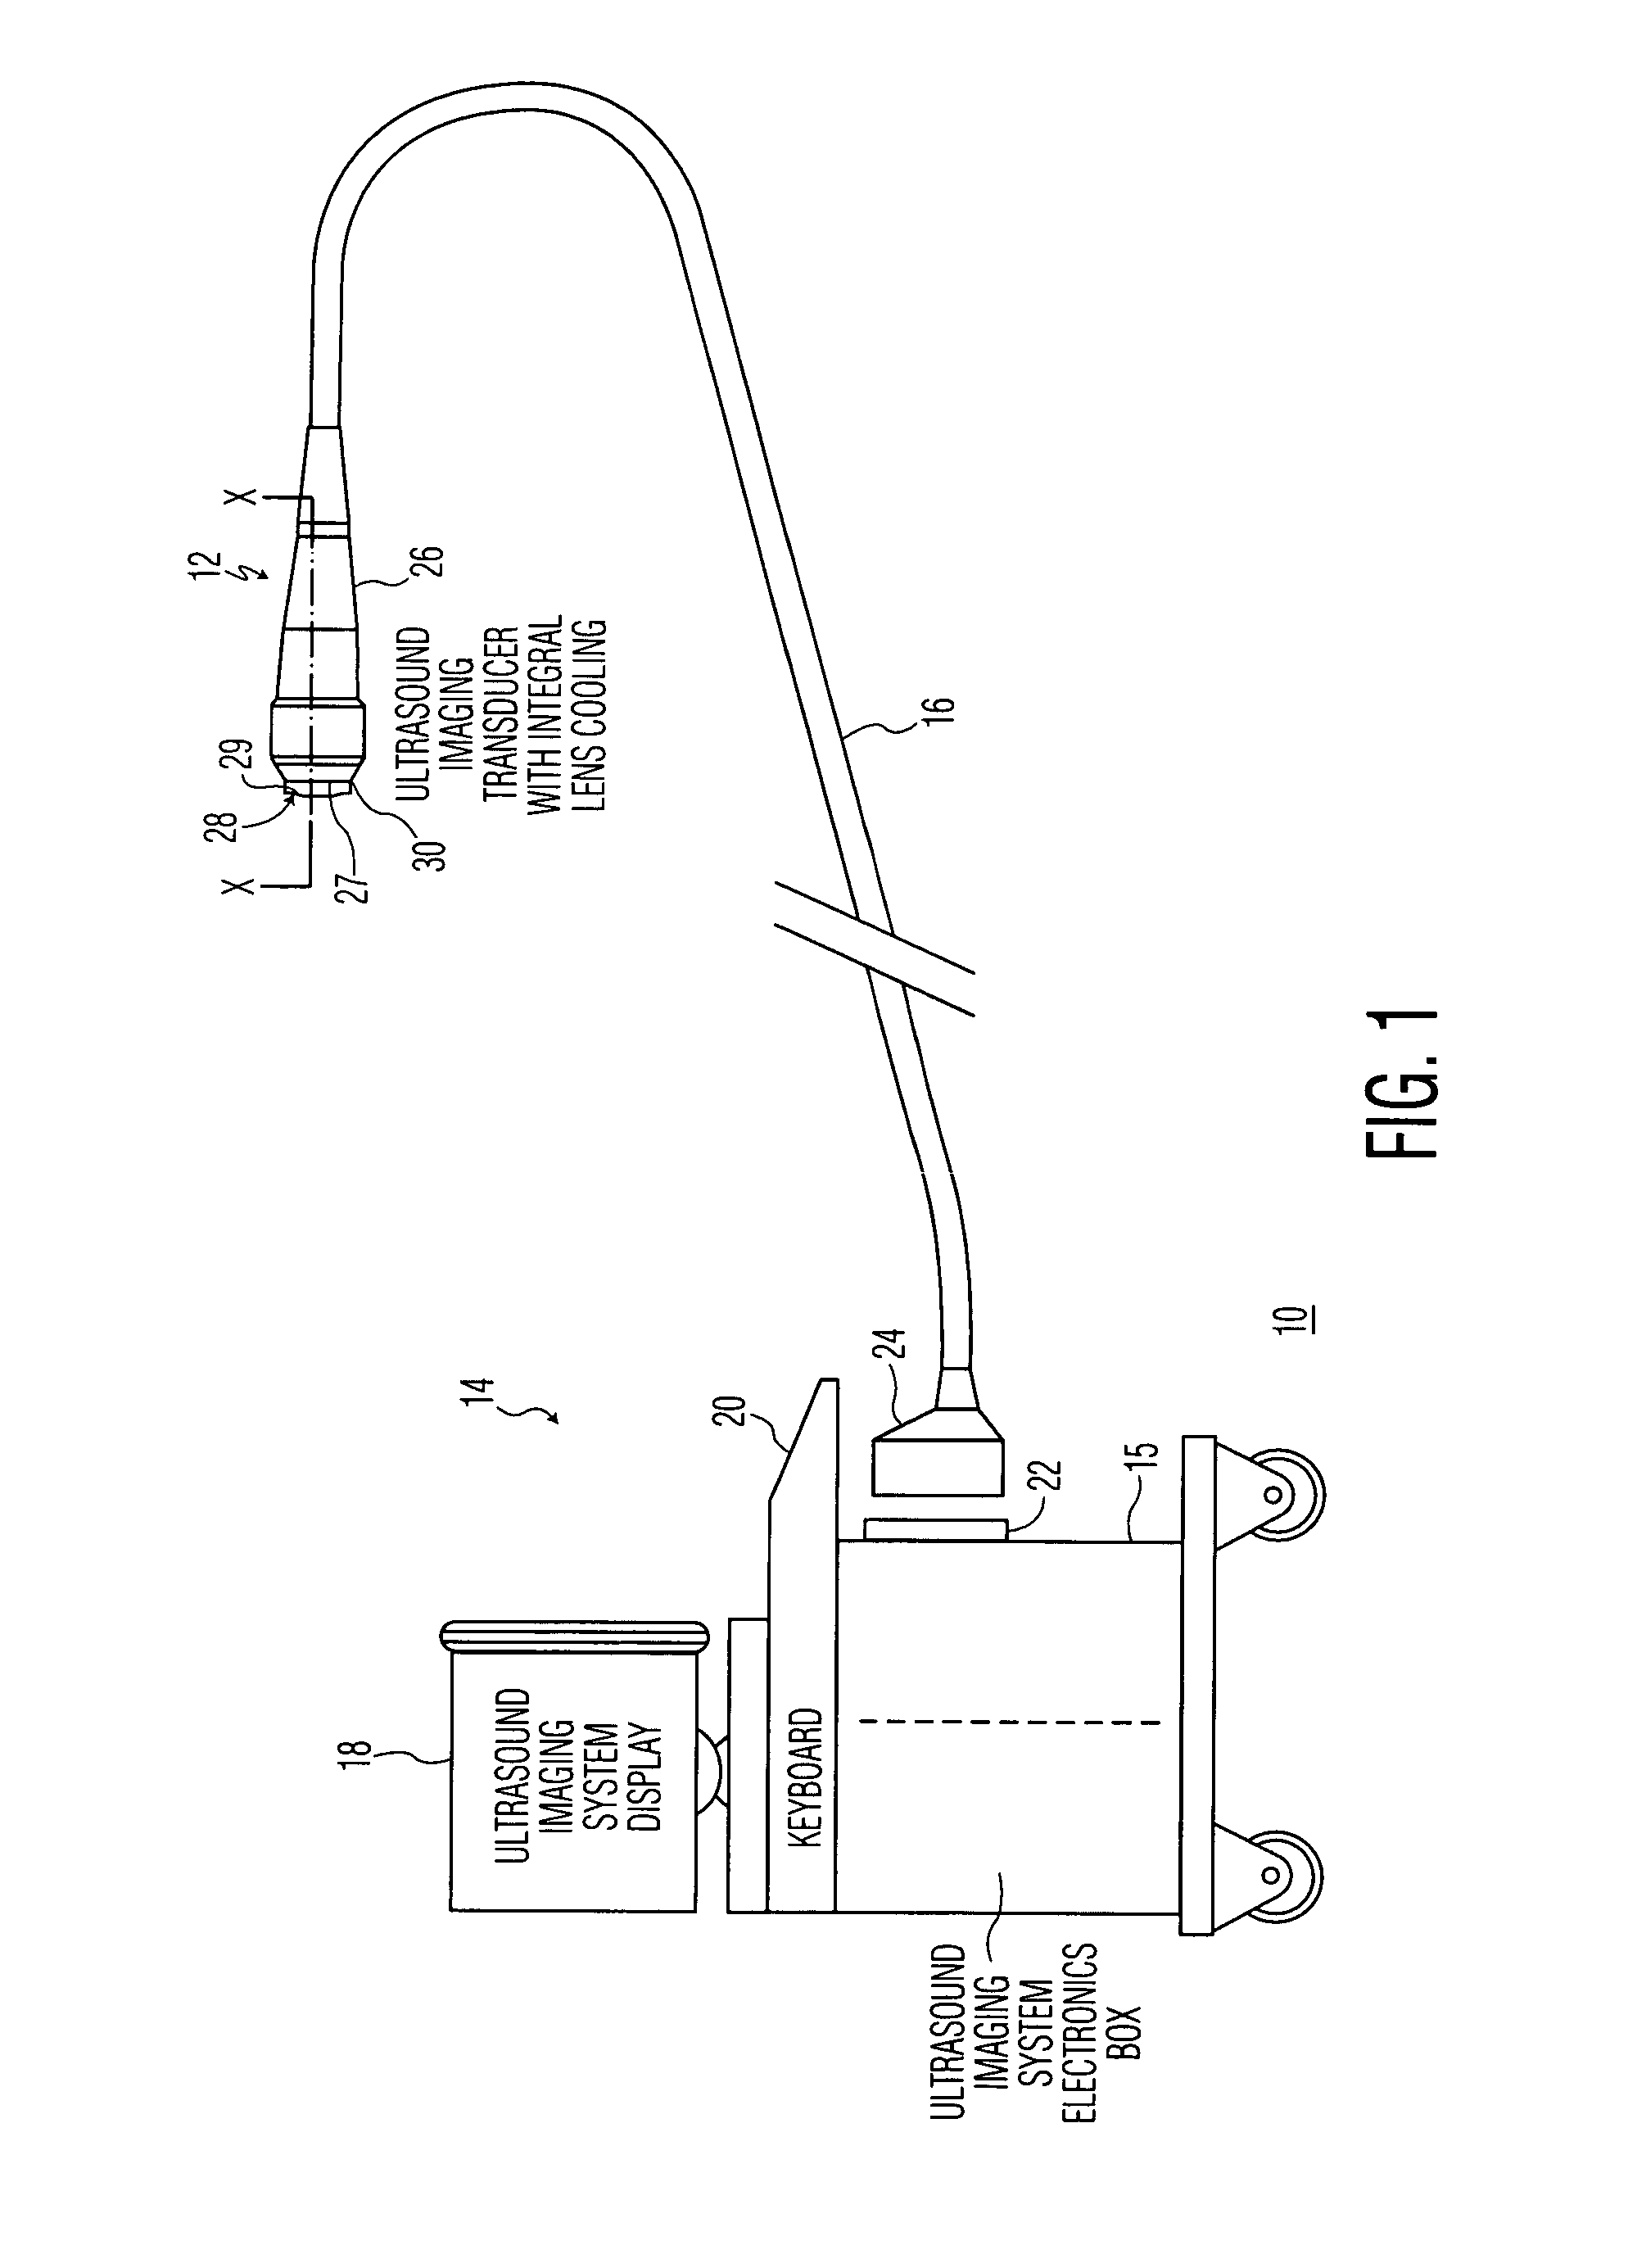 Method and apparatus for cooling a contacting surface of an ultrasound probe